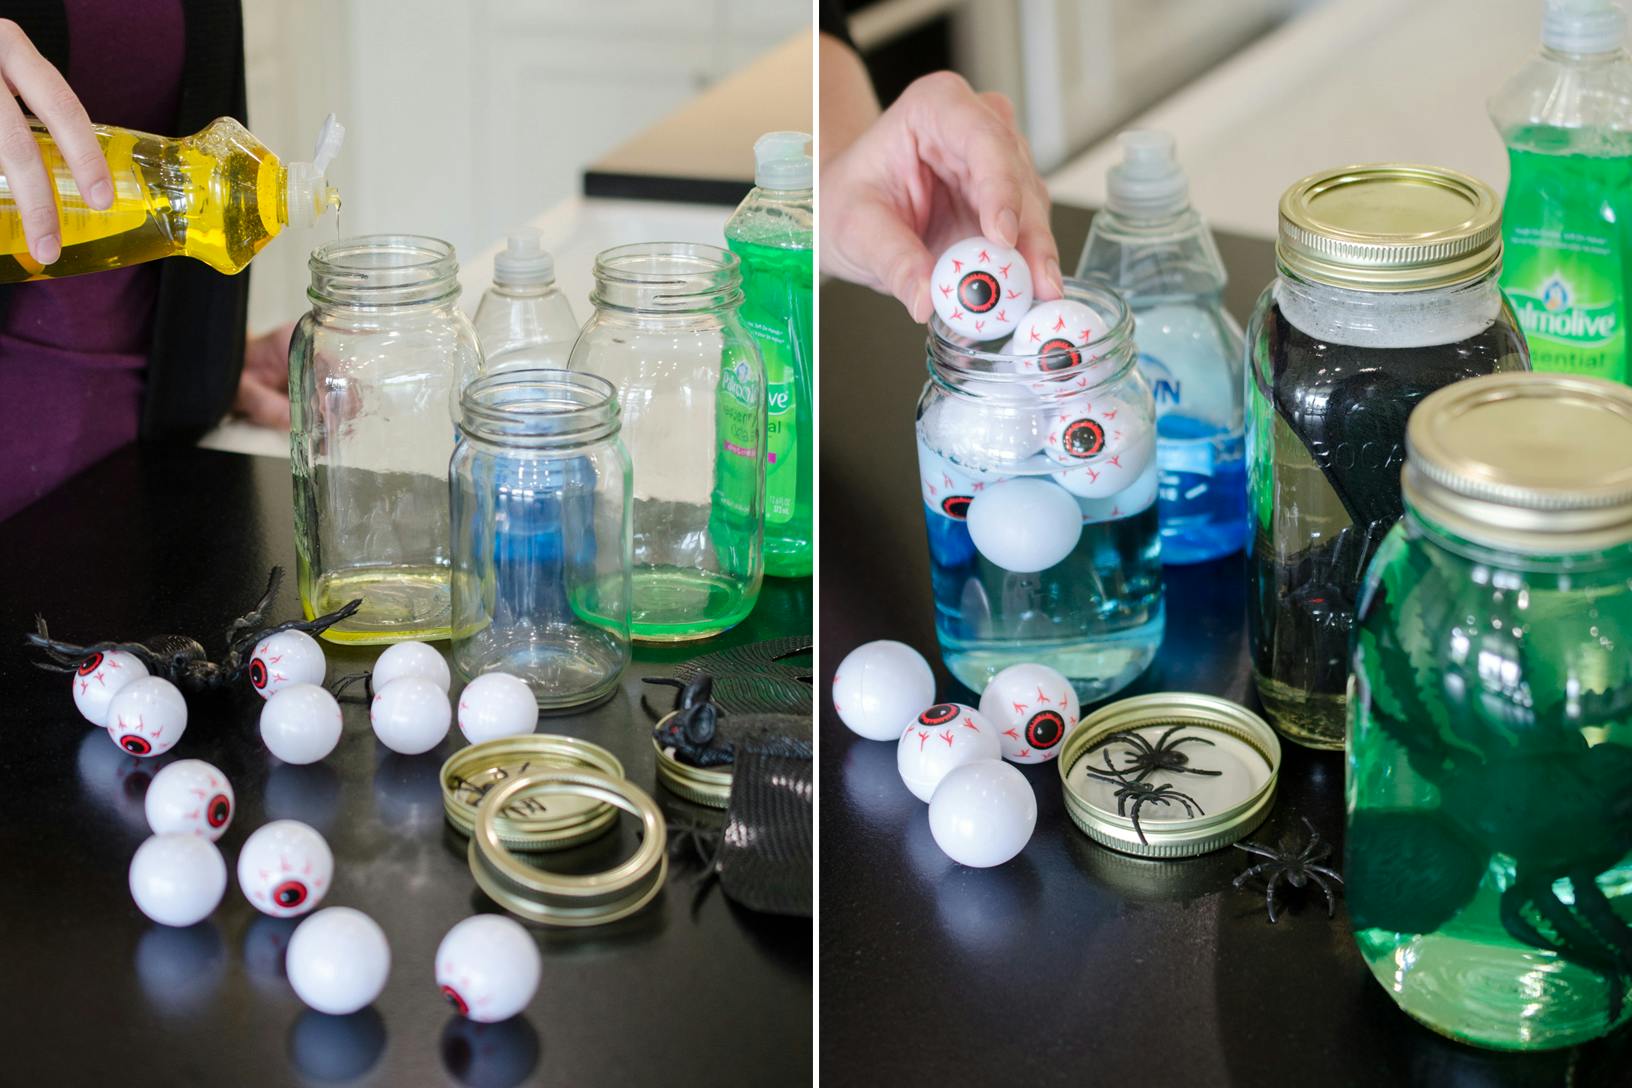 A person adding plastic eyes balls and spiders to a jar filled with dish soap and water.